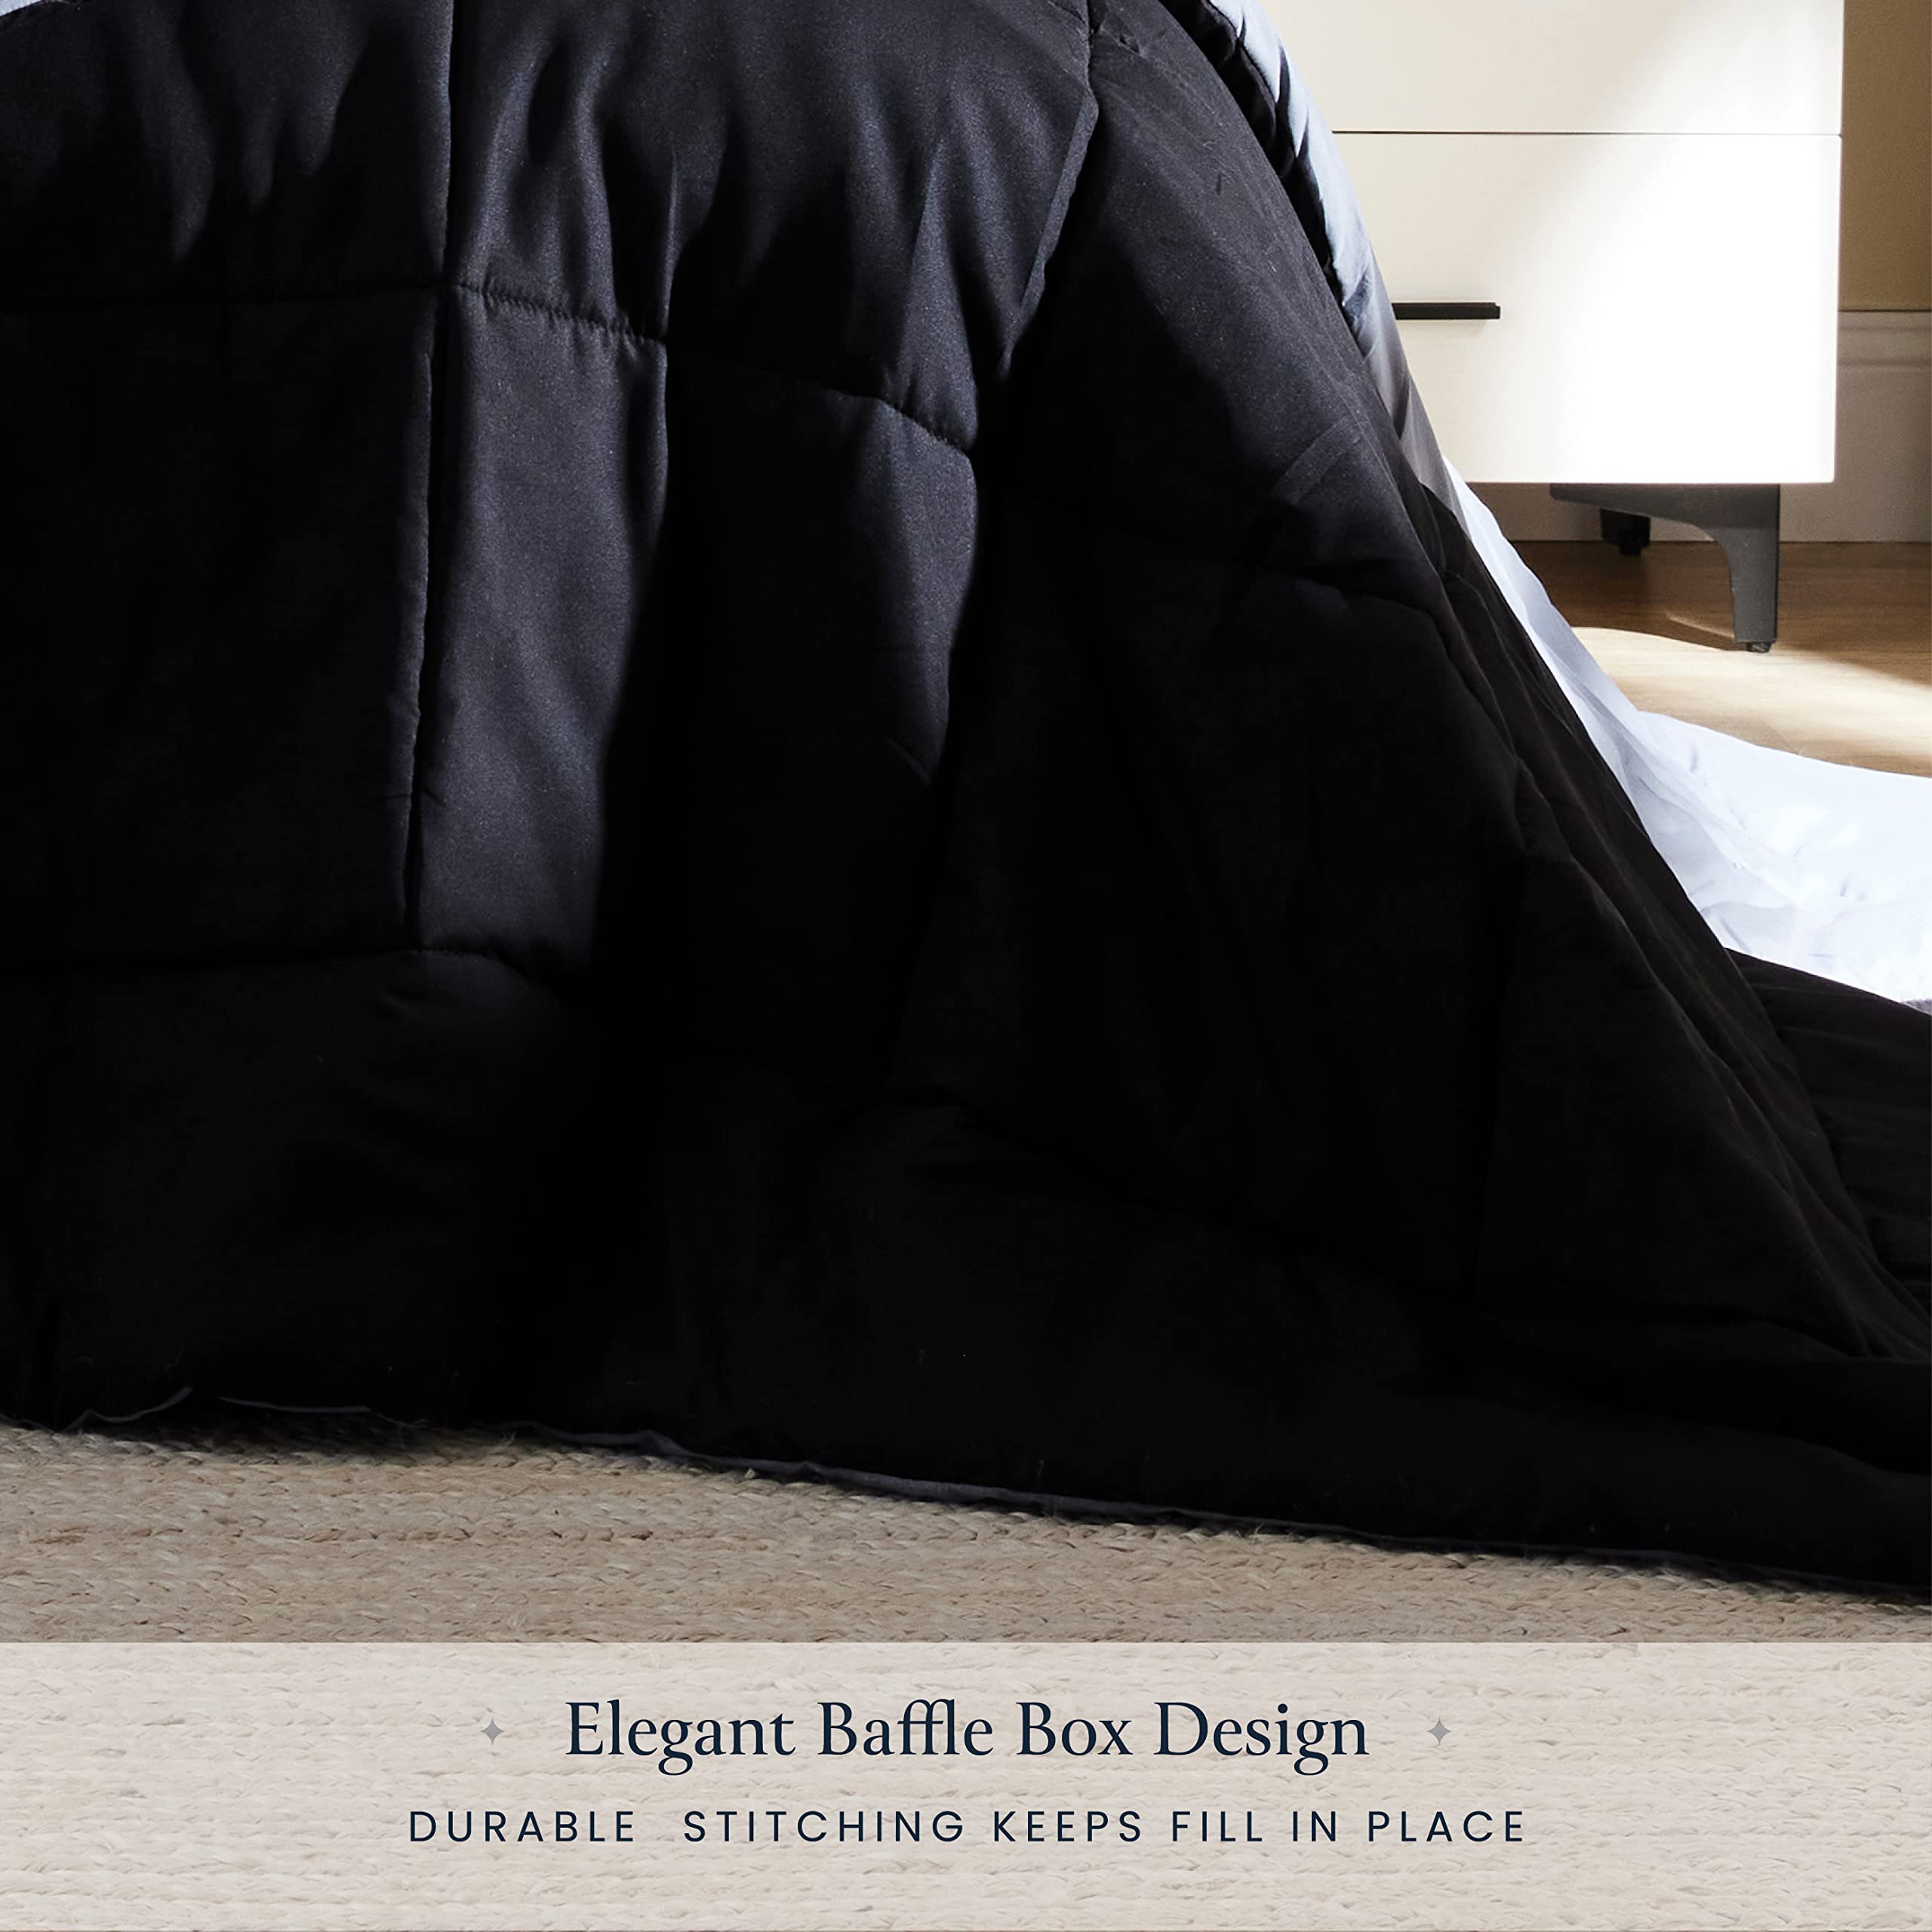 Down-Alternative Comforter Duvet Insert - All-Season Mid-Plush Cooling Comforter - Perfect for Hot Sleepers - Soft & Fluffy Bed Comforter, Elegant Box Quilted Comforters  - Good